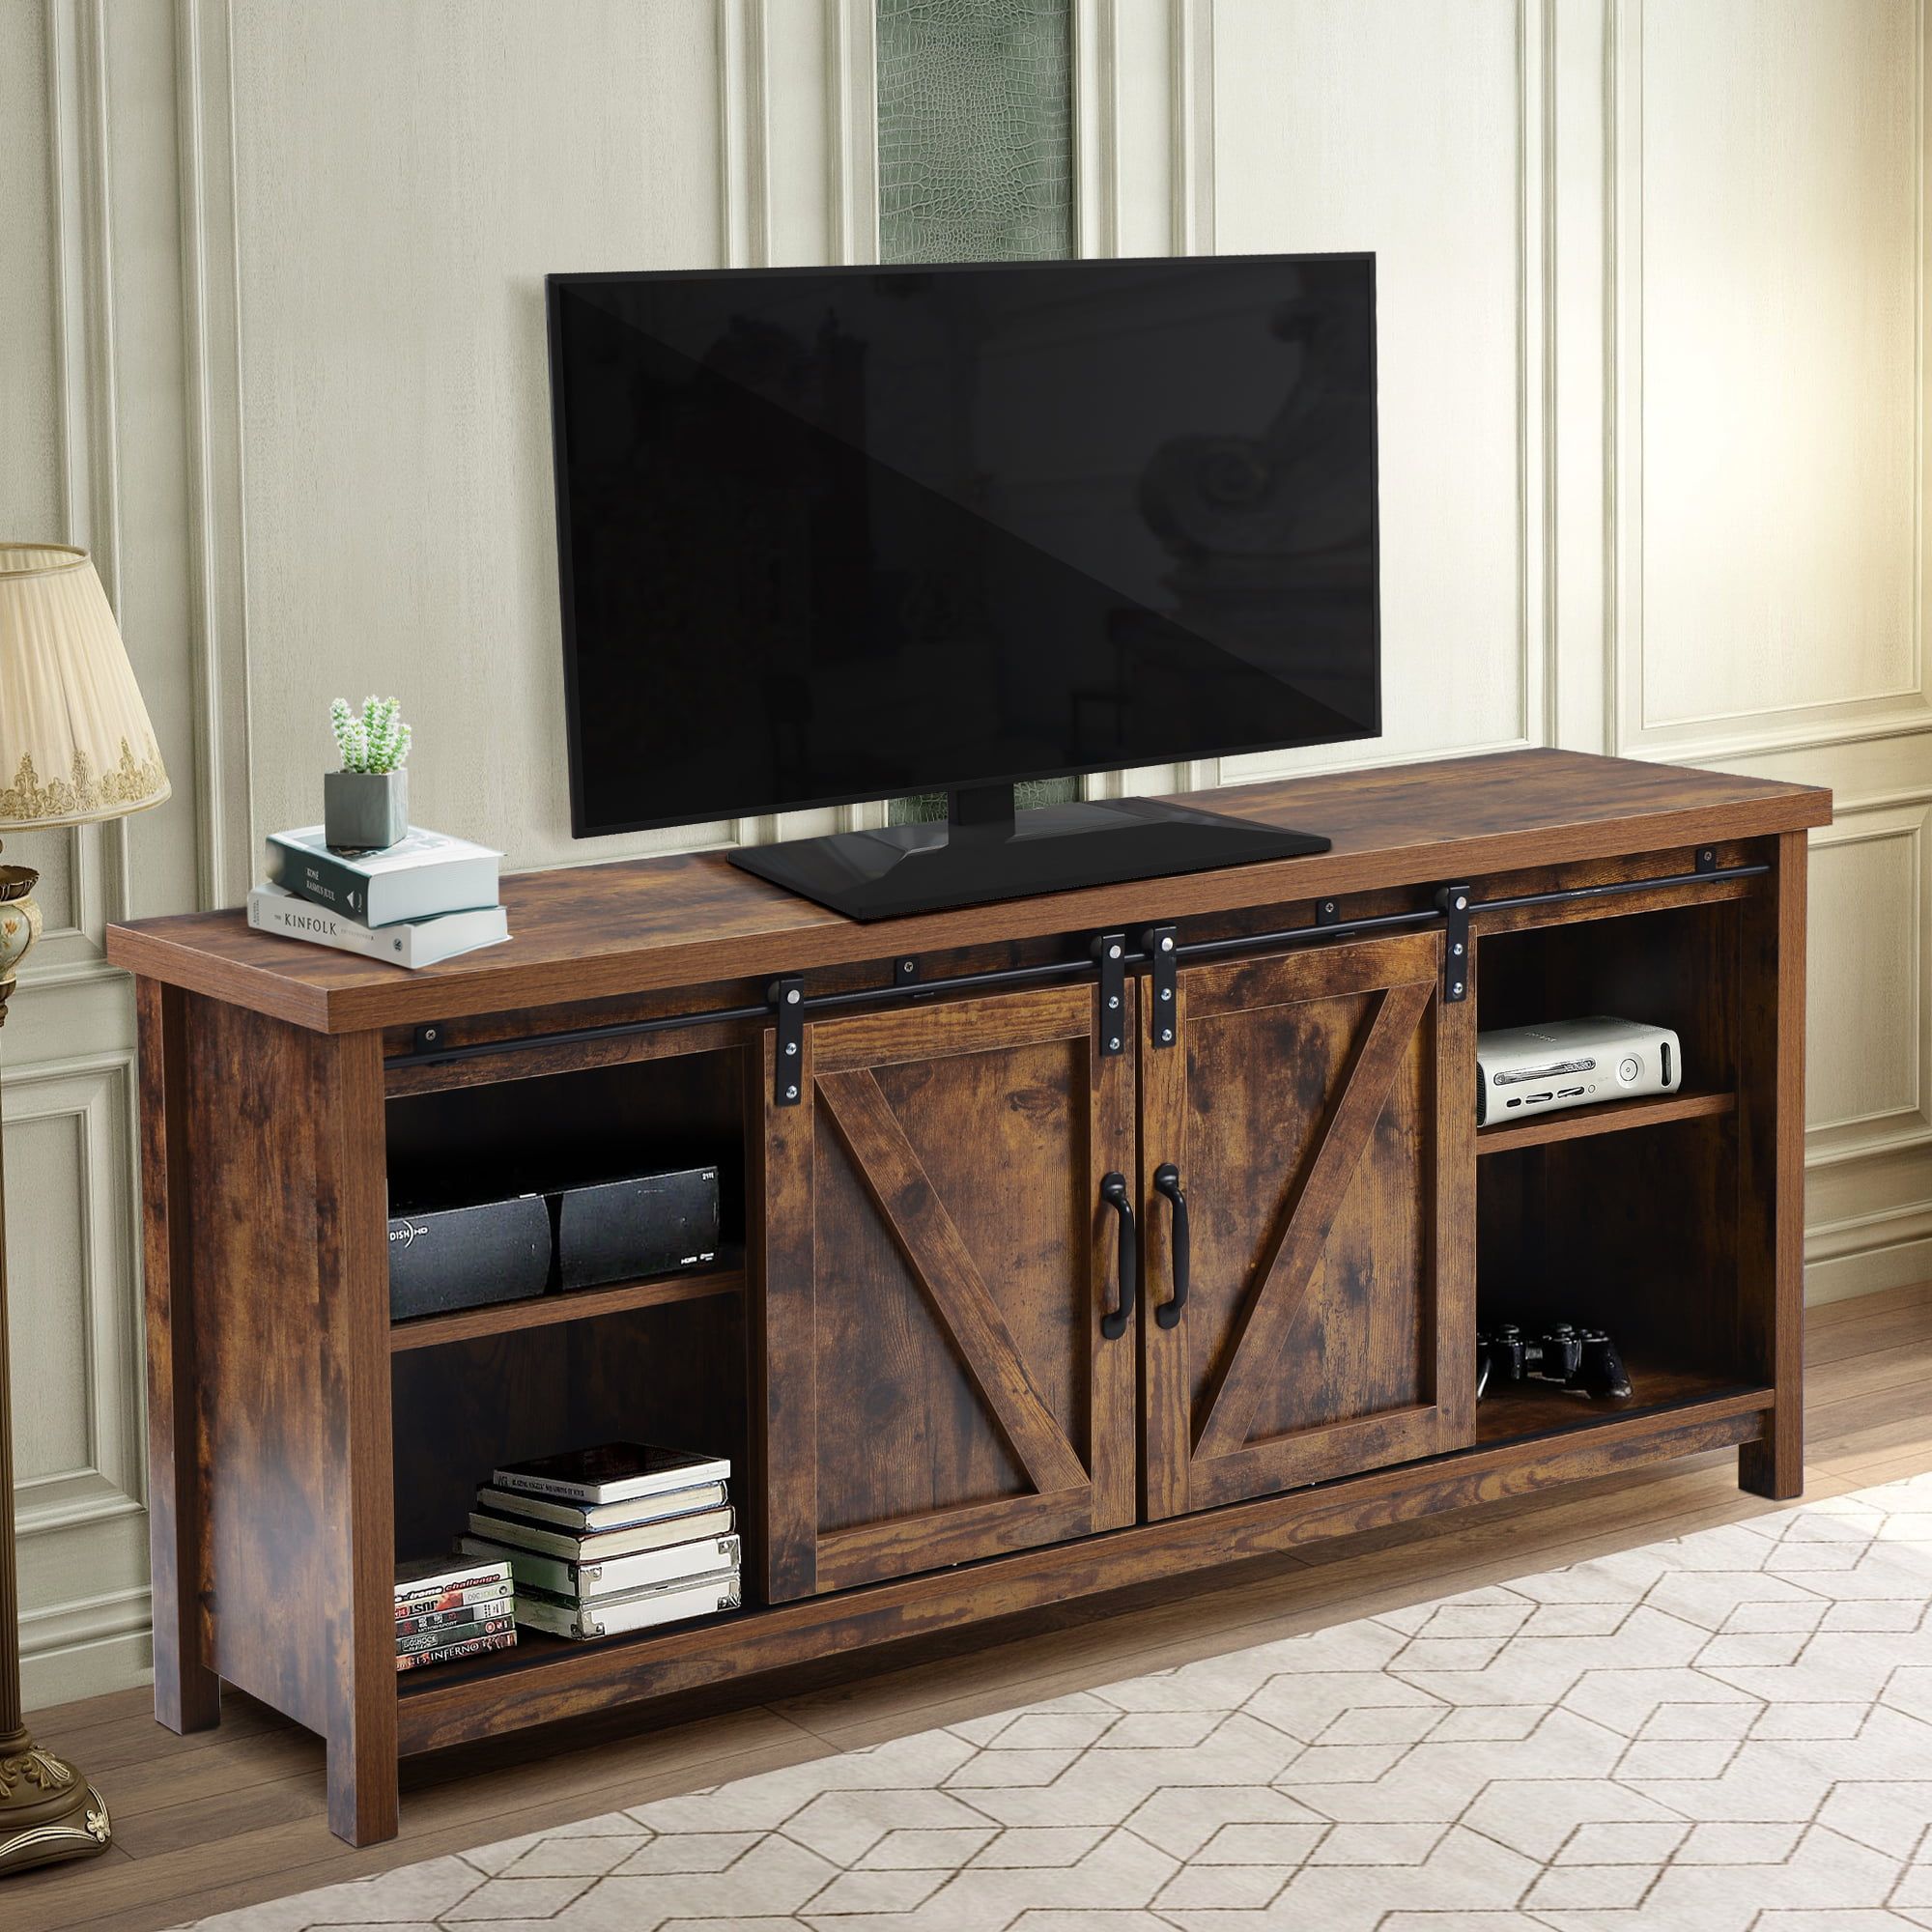 Buy Farmhouse 52'' Tv Stands With Adjustable Leg, Segmart Traditional Inside Farmhouse Stands For Tvs (View 12 of 20)